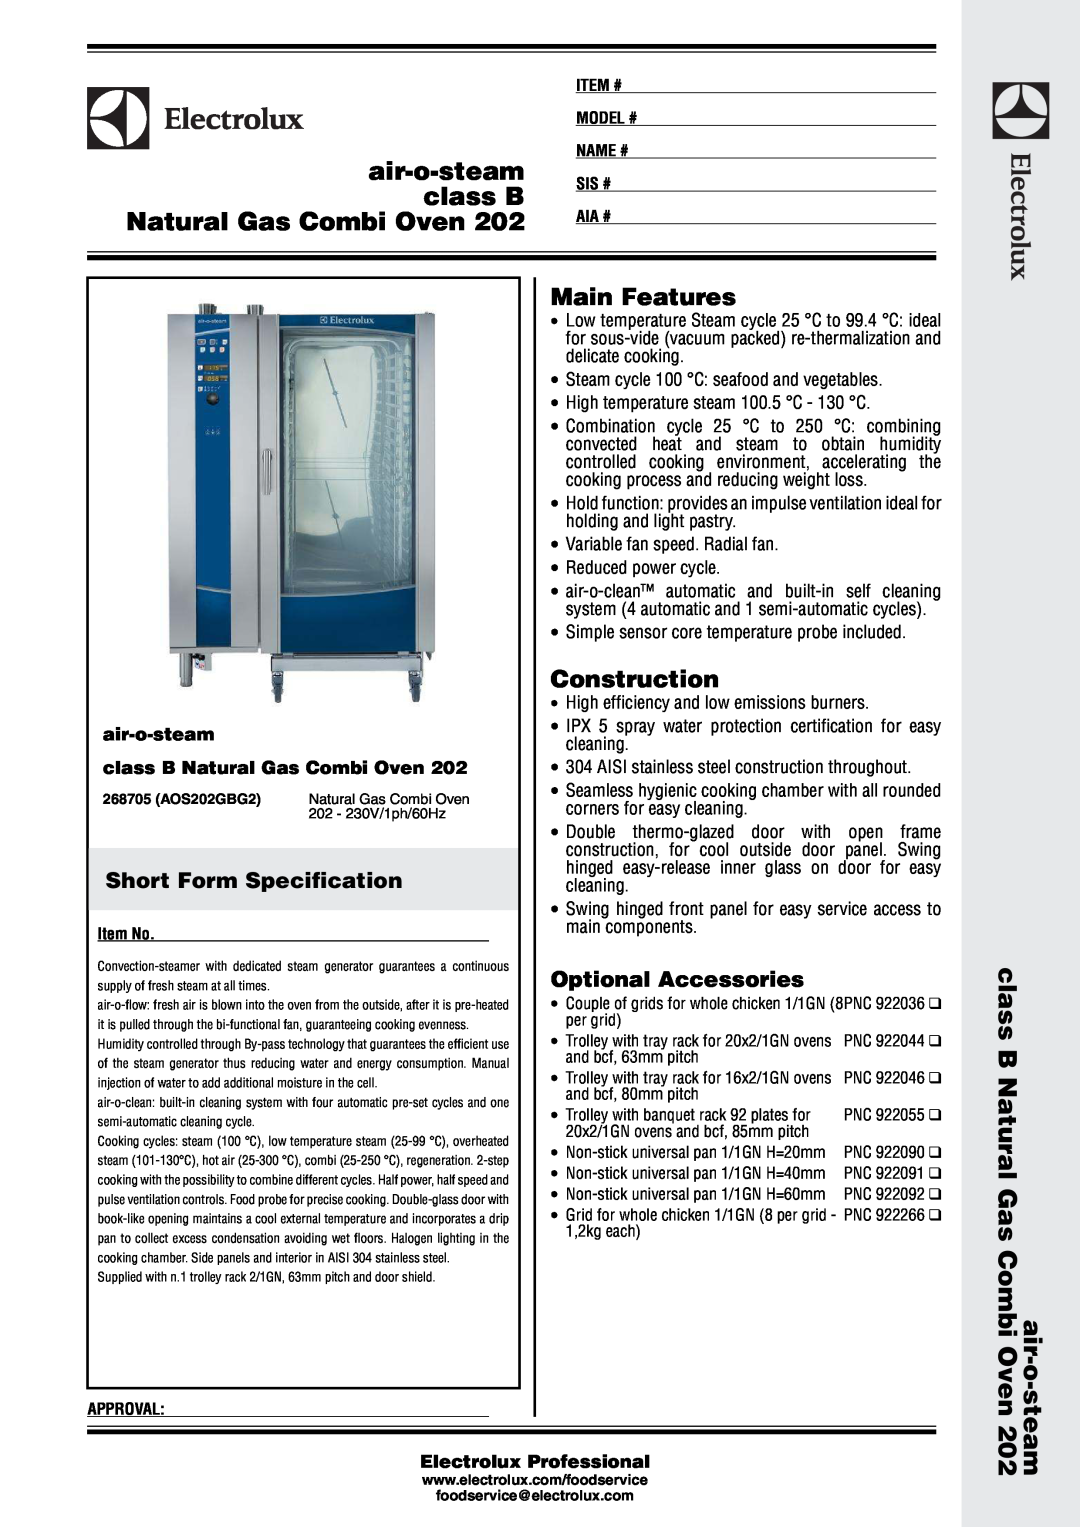 Electrolux 202 manual air-o-steam class B Natural Gas Combi Oven, Short Form Specification, Main Features 